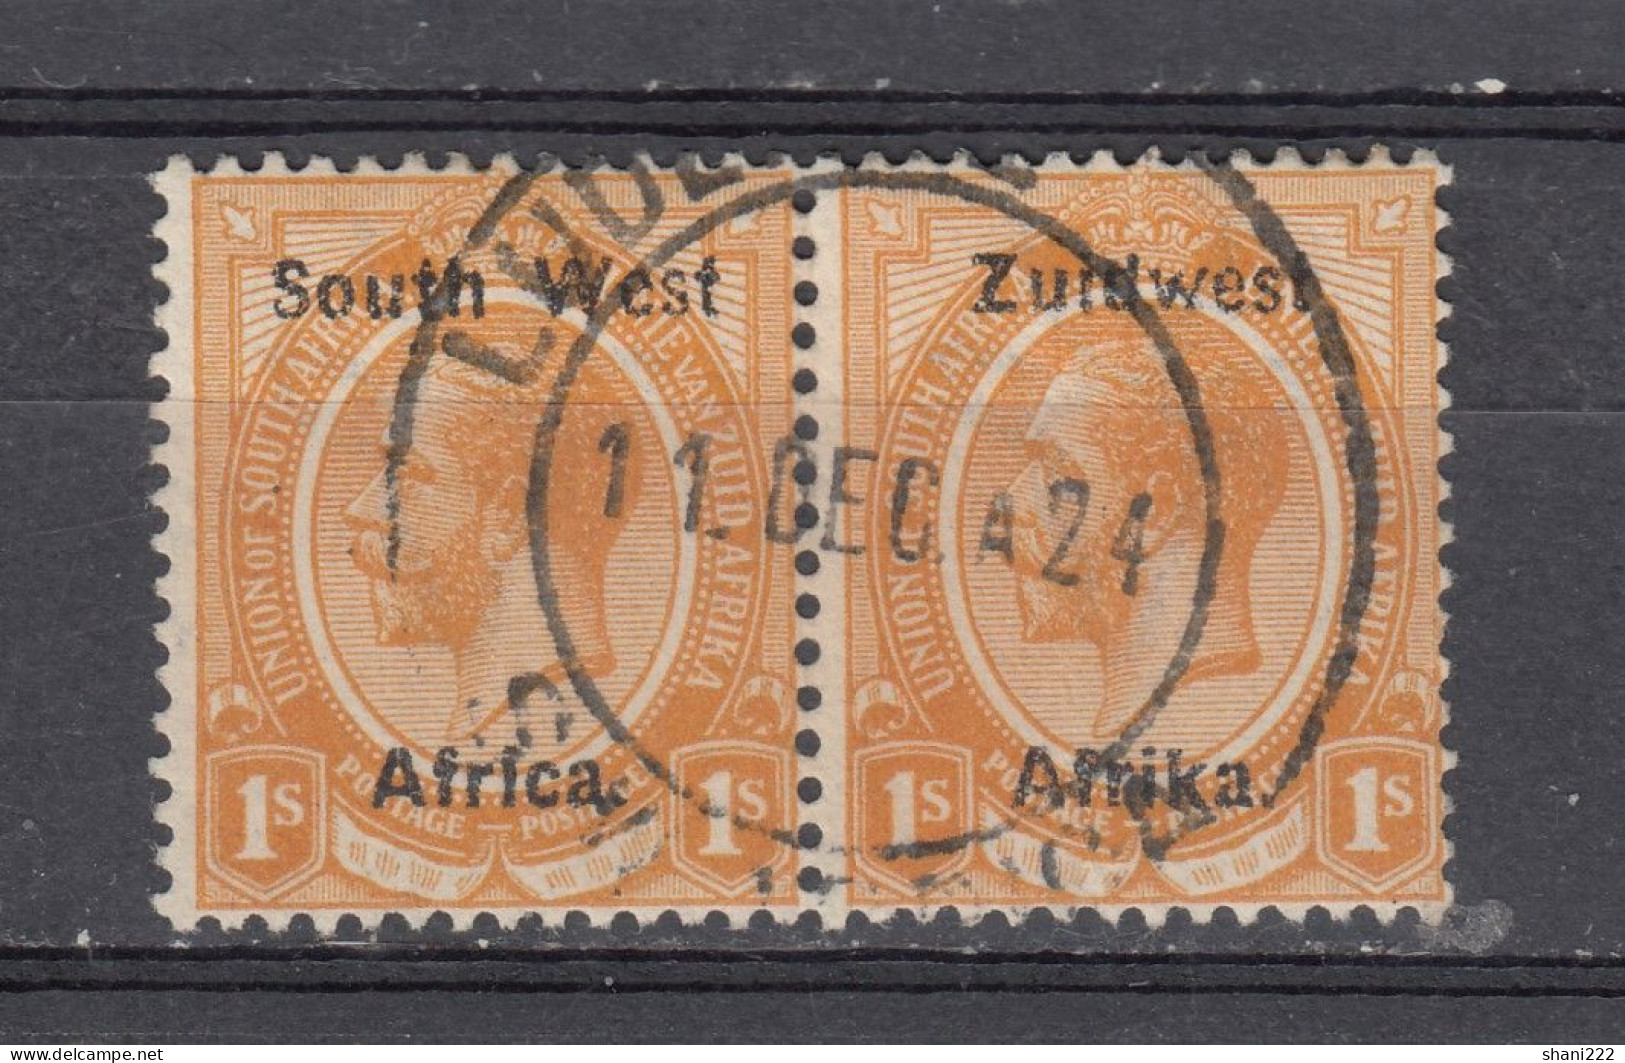 South West Africa 1923 - Overprinted1/- , Pair,  Vf Used (e-739) - Afrique Du Sud-Ouest (1923-1990)